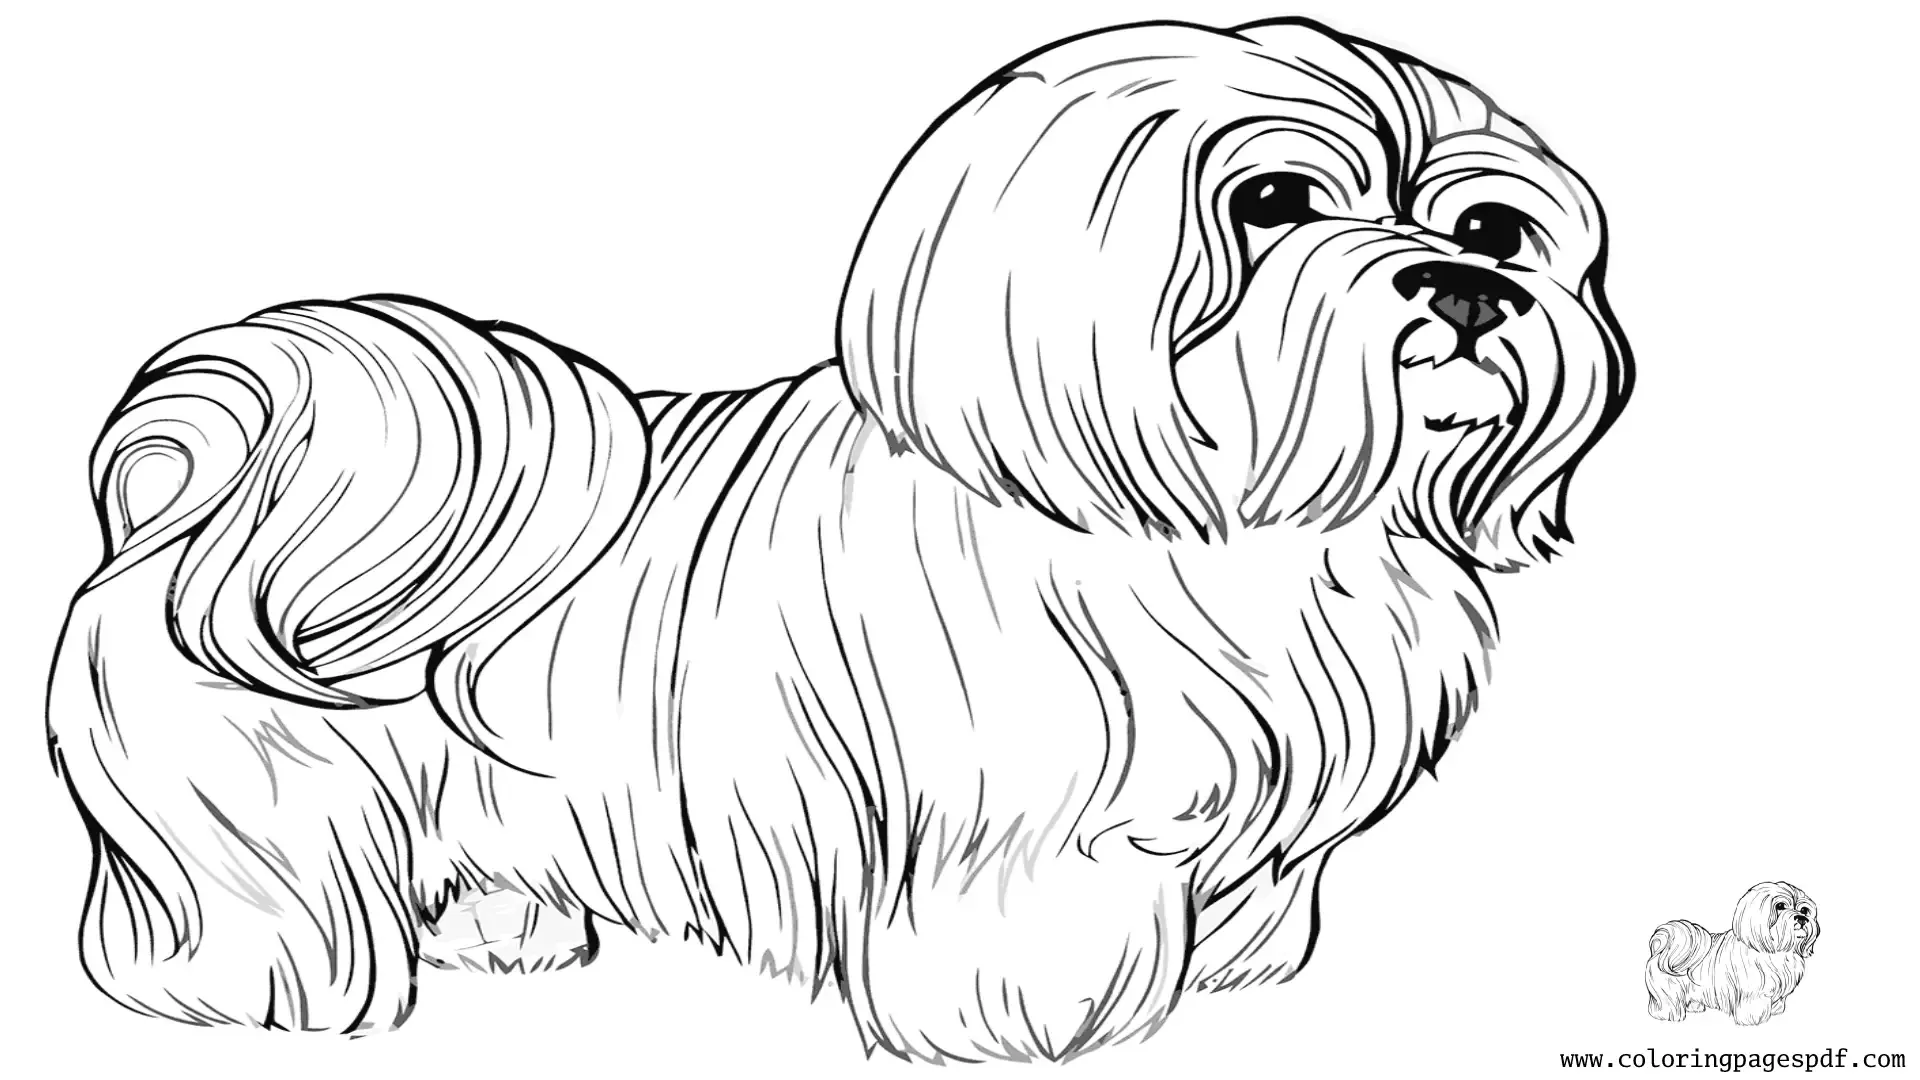 Coloring Page Of A Long Haired Dog